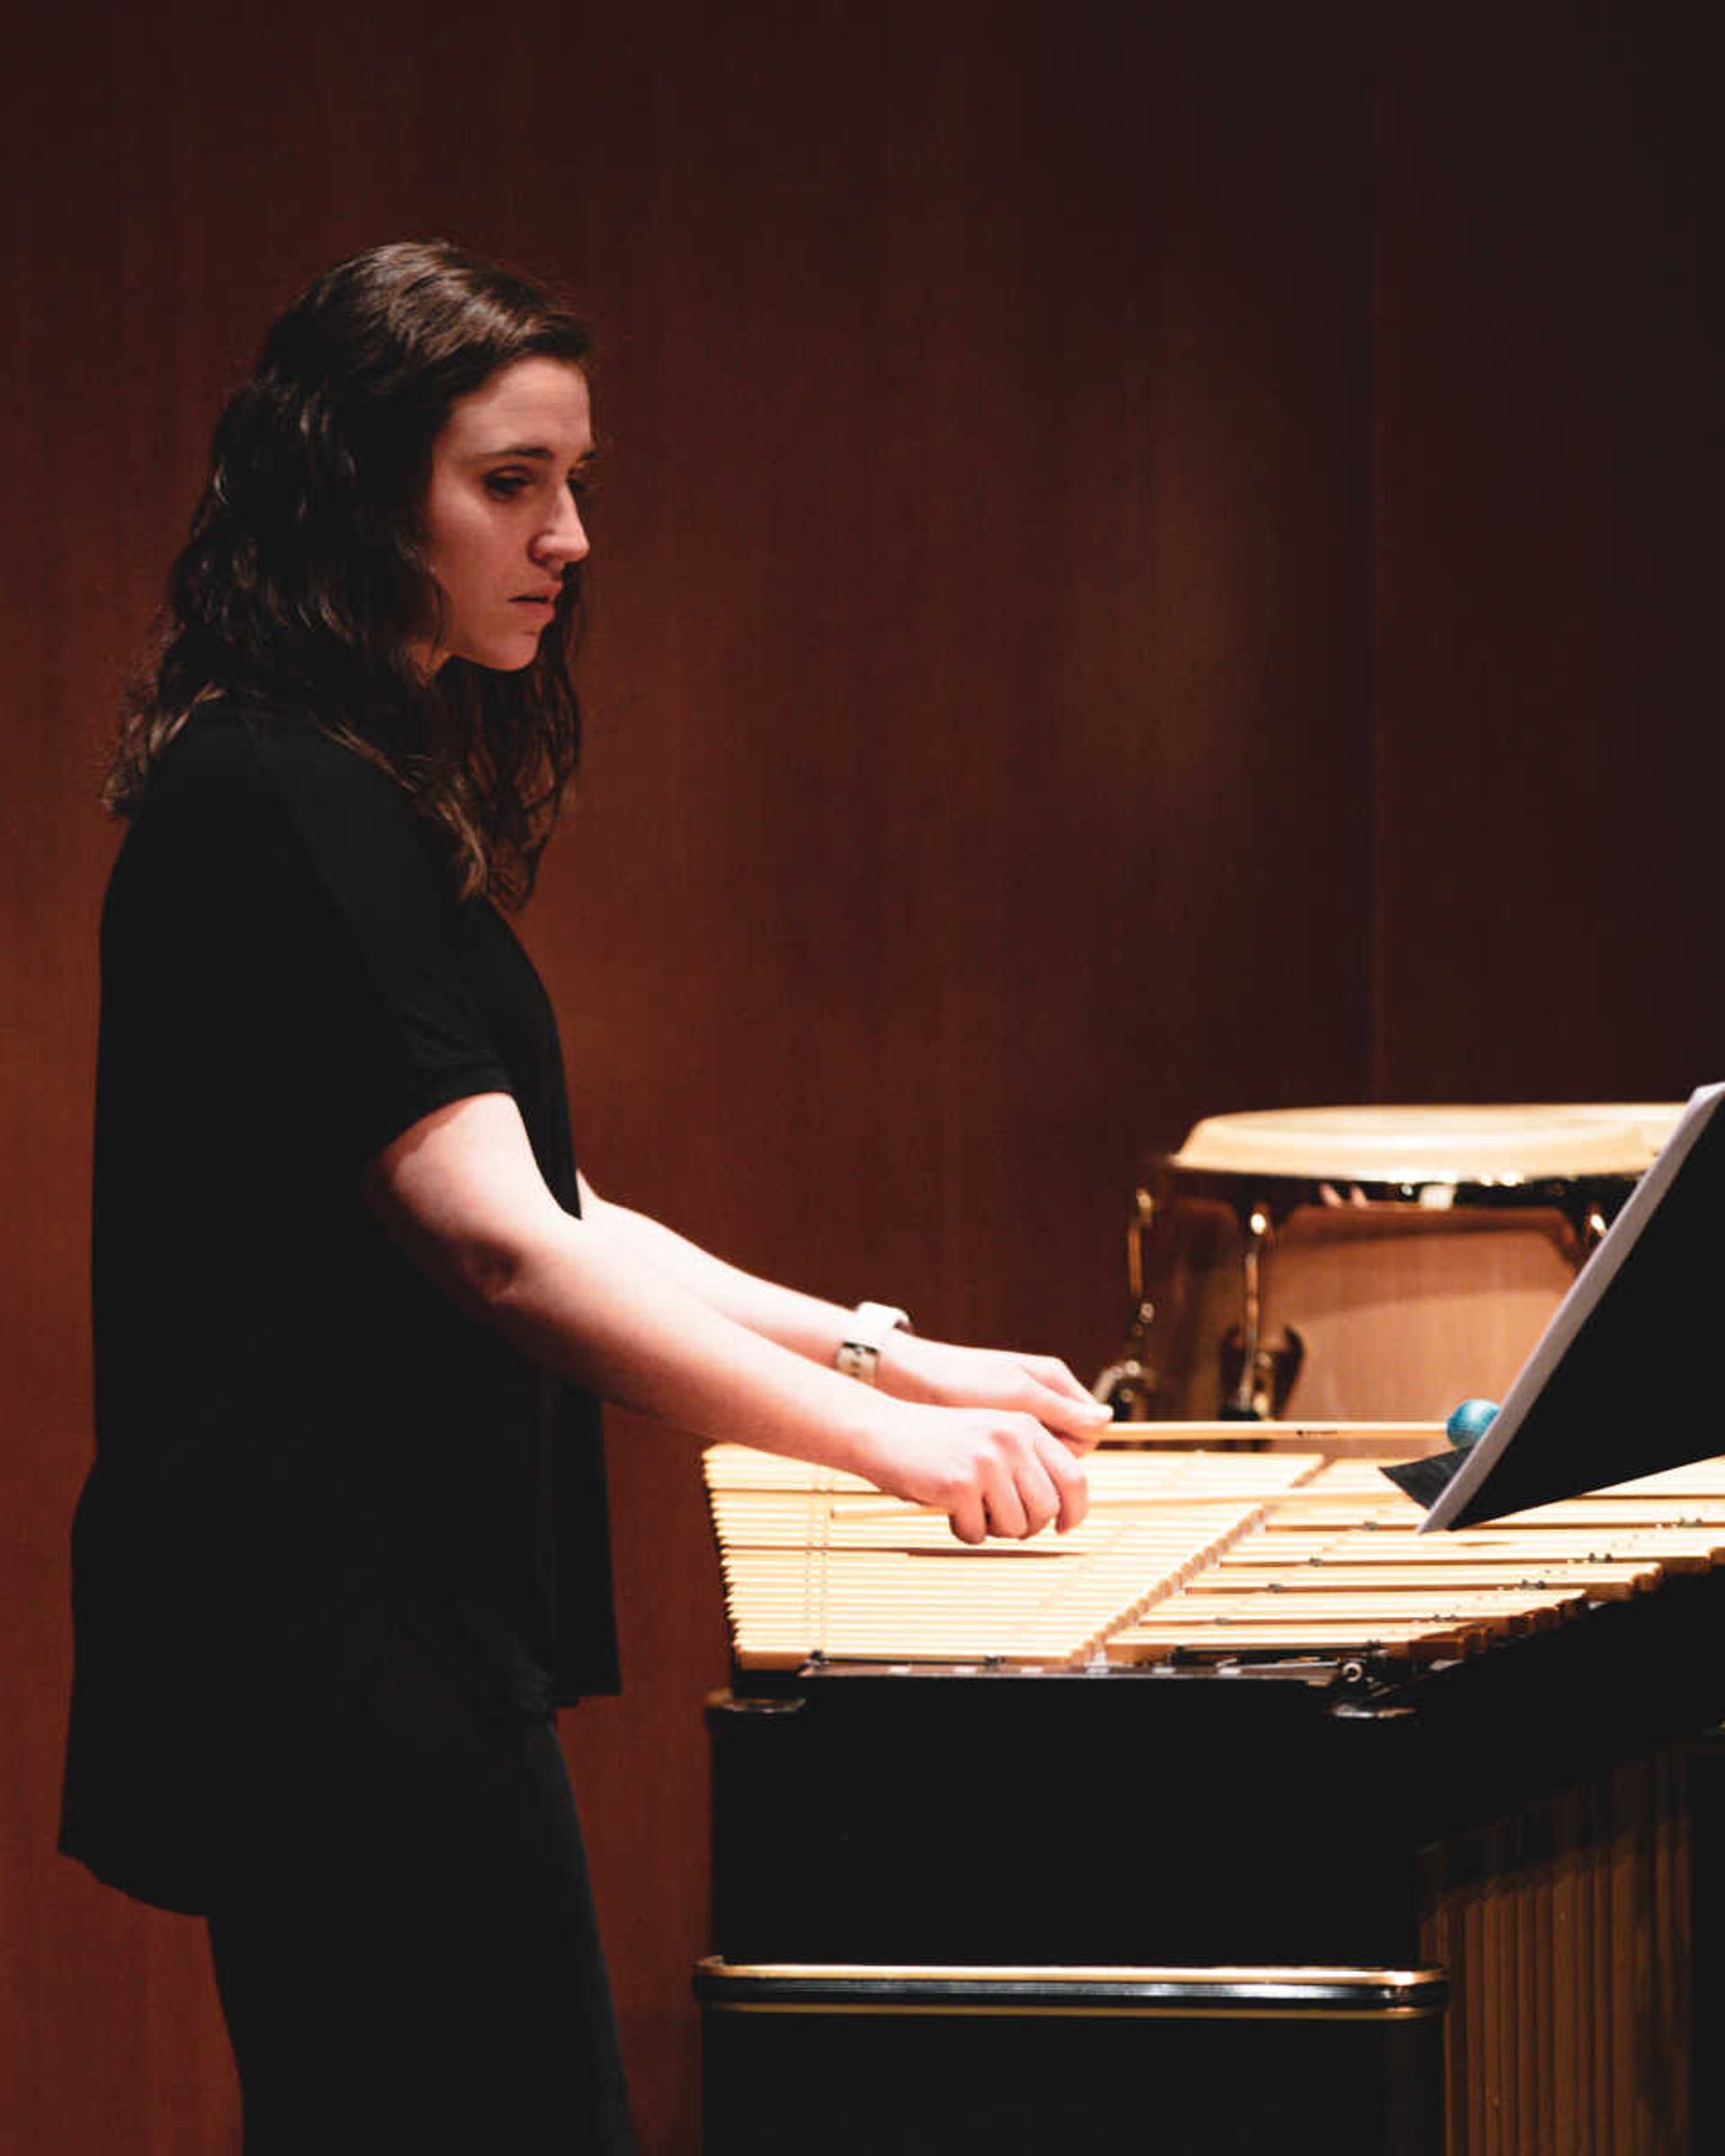 Auxiliary percussionist Alisah Coots playing the xylophone during the 22nd Annual Clark Terry/Phi Mu Alpha Jazz Festival Gala Concert on Feb. 7 in Bedell Performance Hall in Cape Girardeau, Mo.